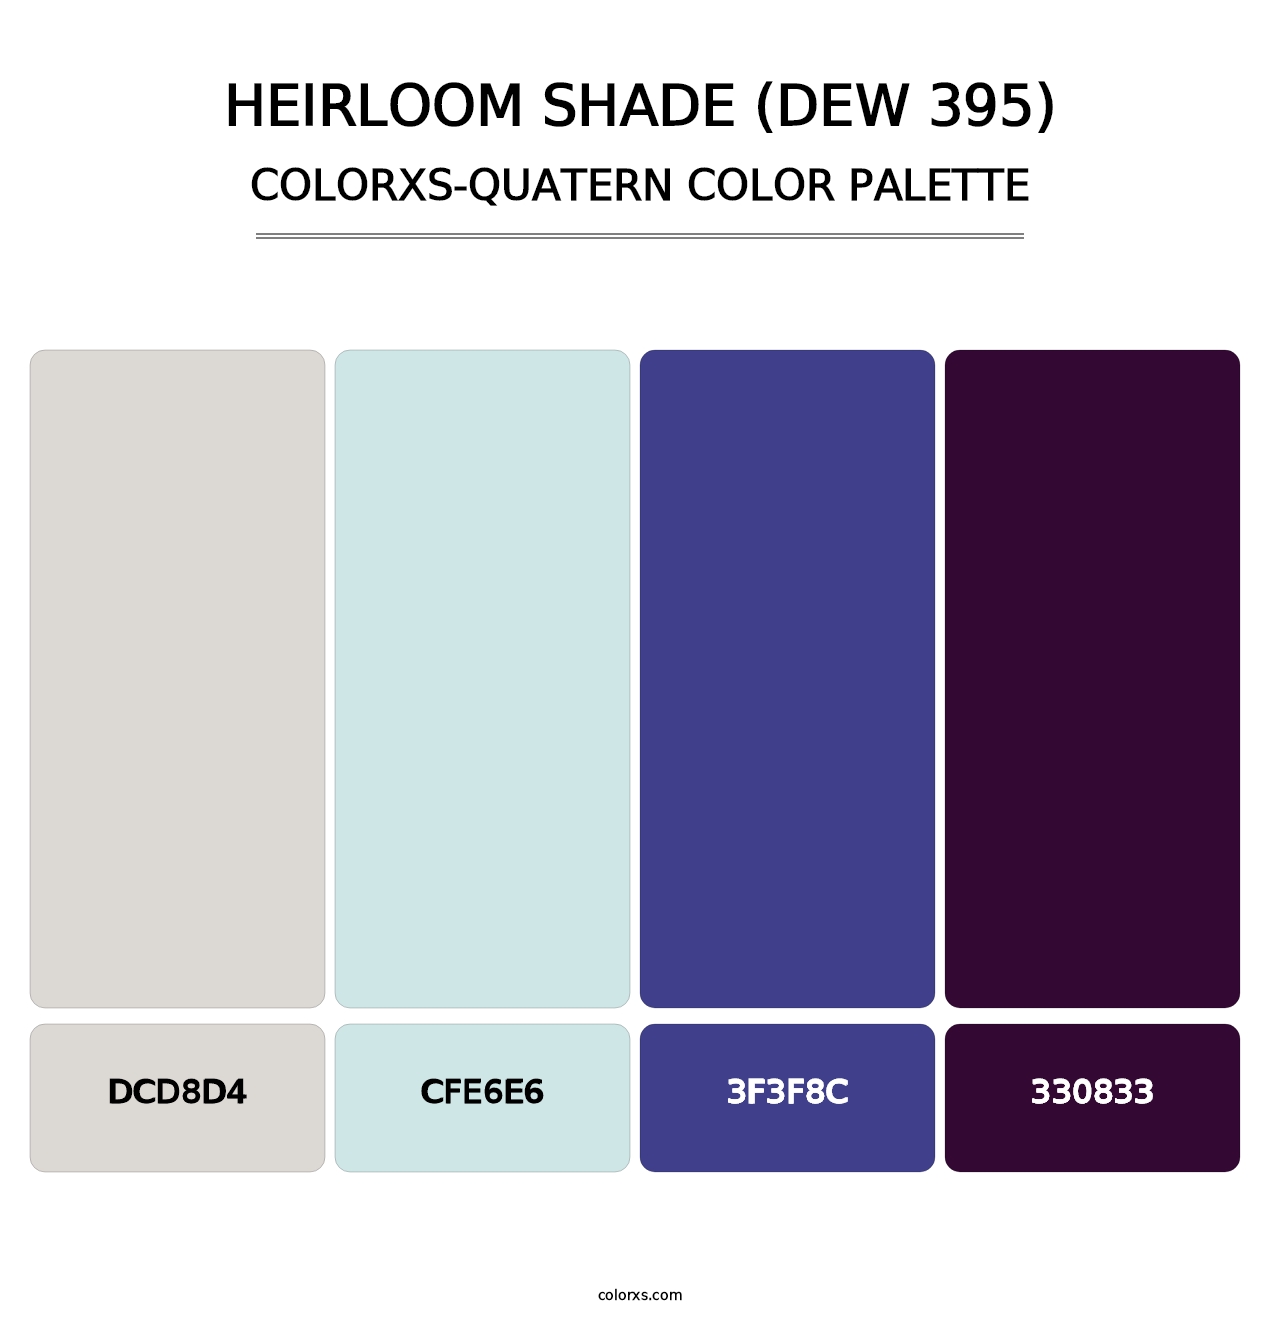 Heirloom Shade (DEW 395) - Colorxs Quatern Palette